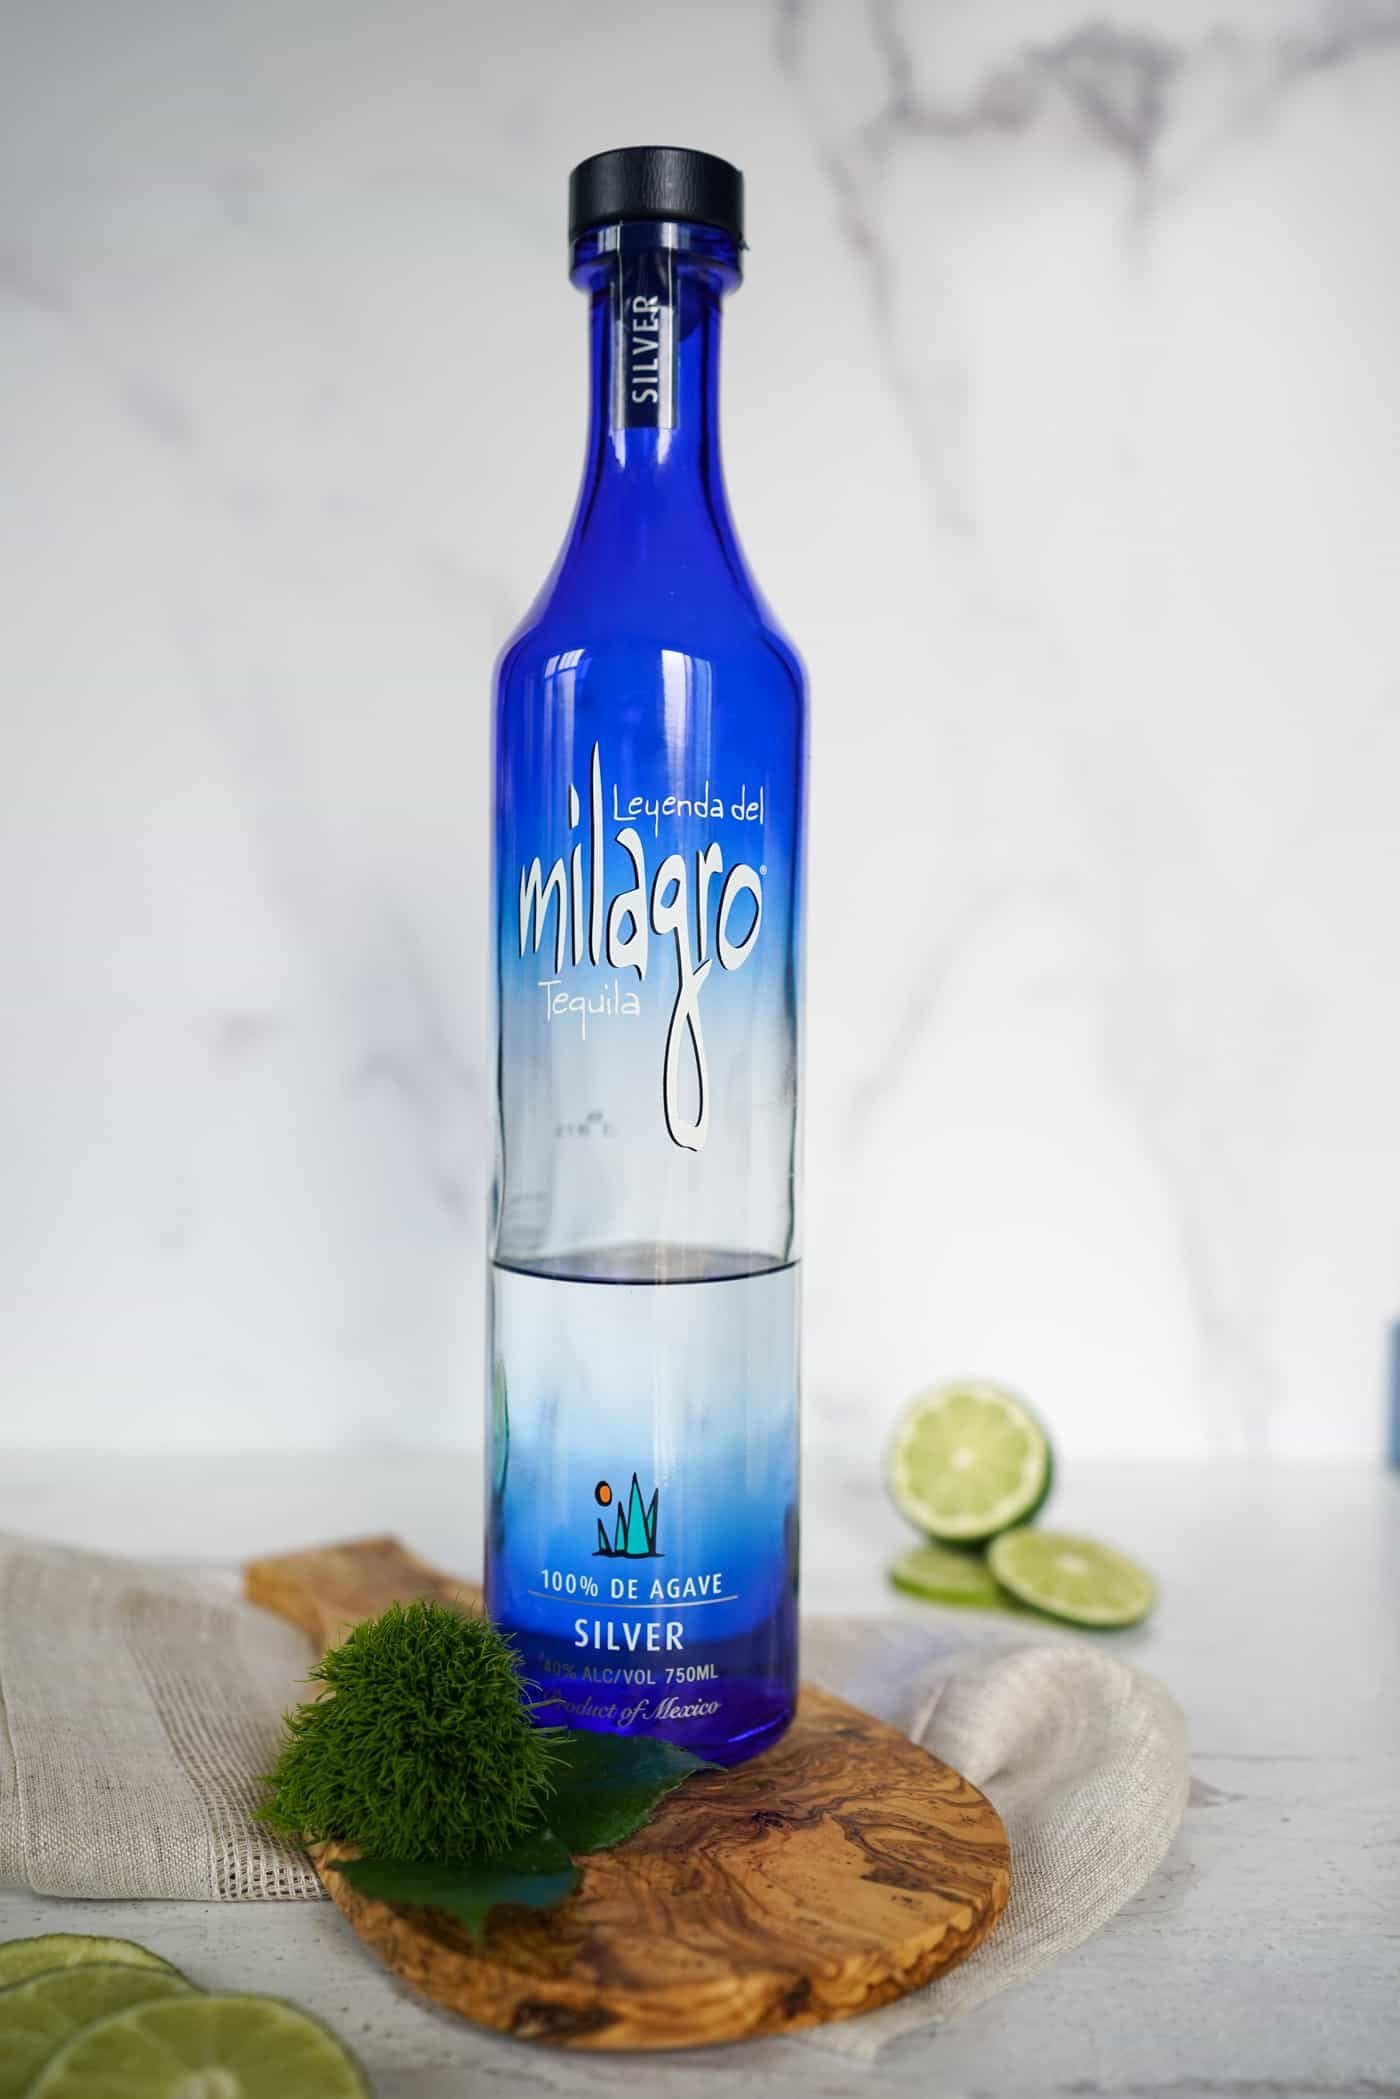 A bottle of Milagro Silver Tequila